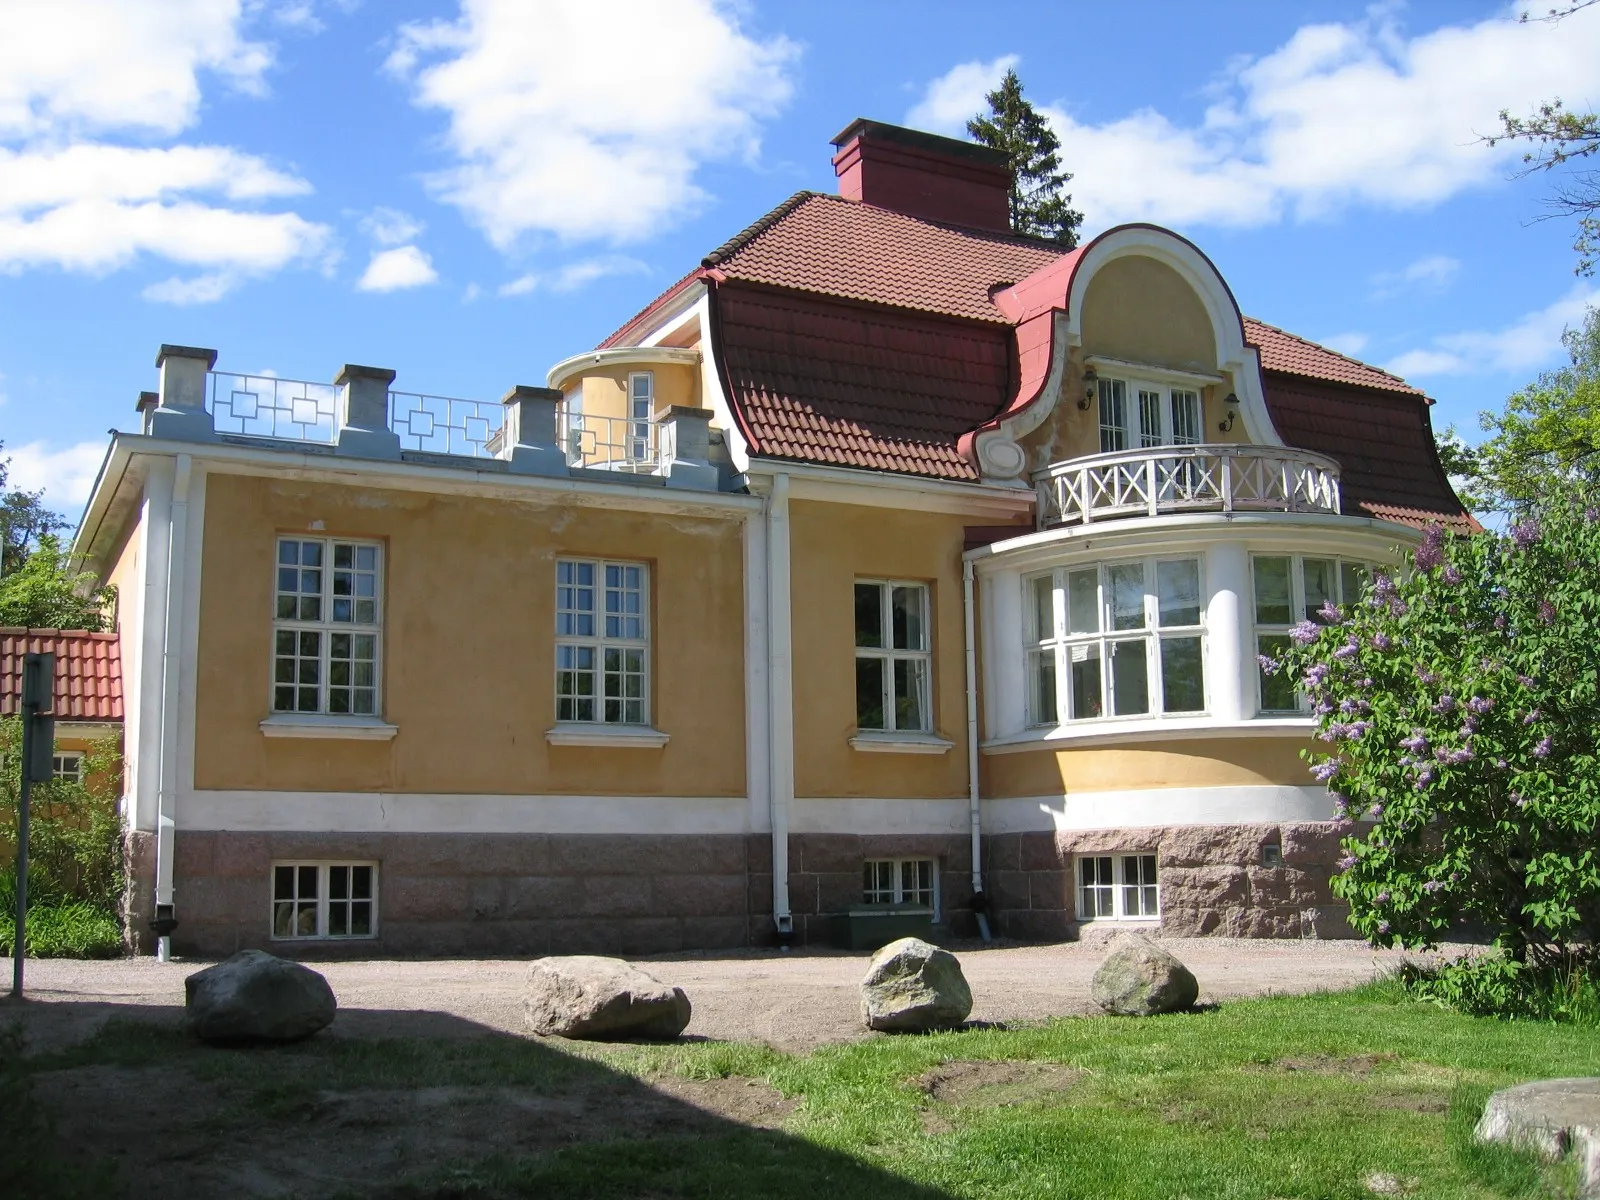 Photo showing: Villa Junghans in Kauniainen, Finland. The building is owned by the town.